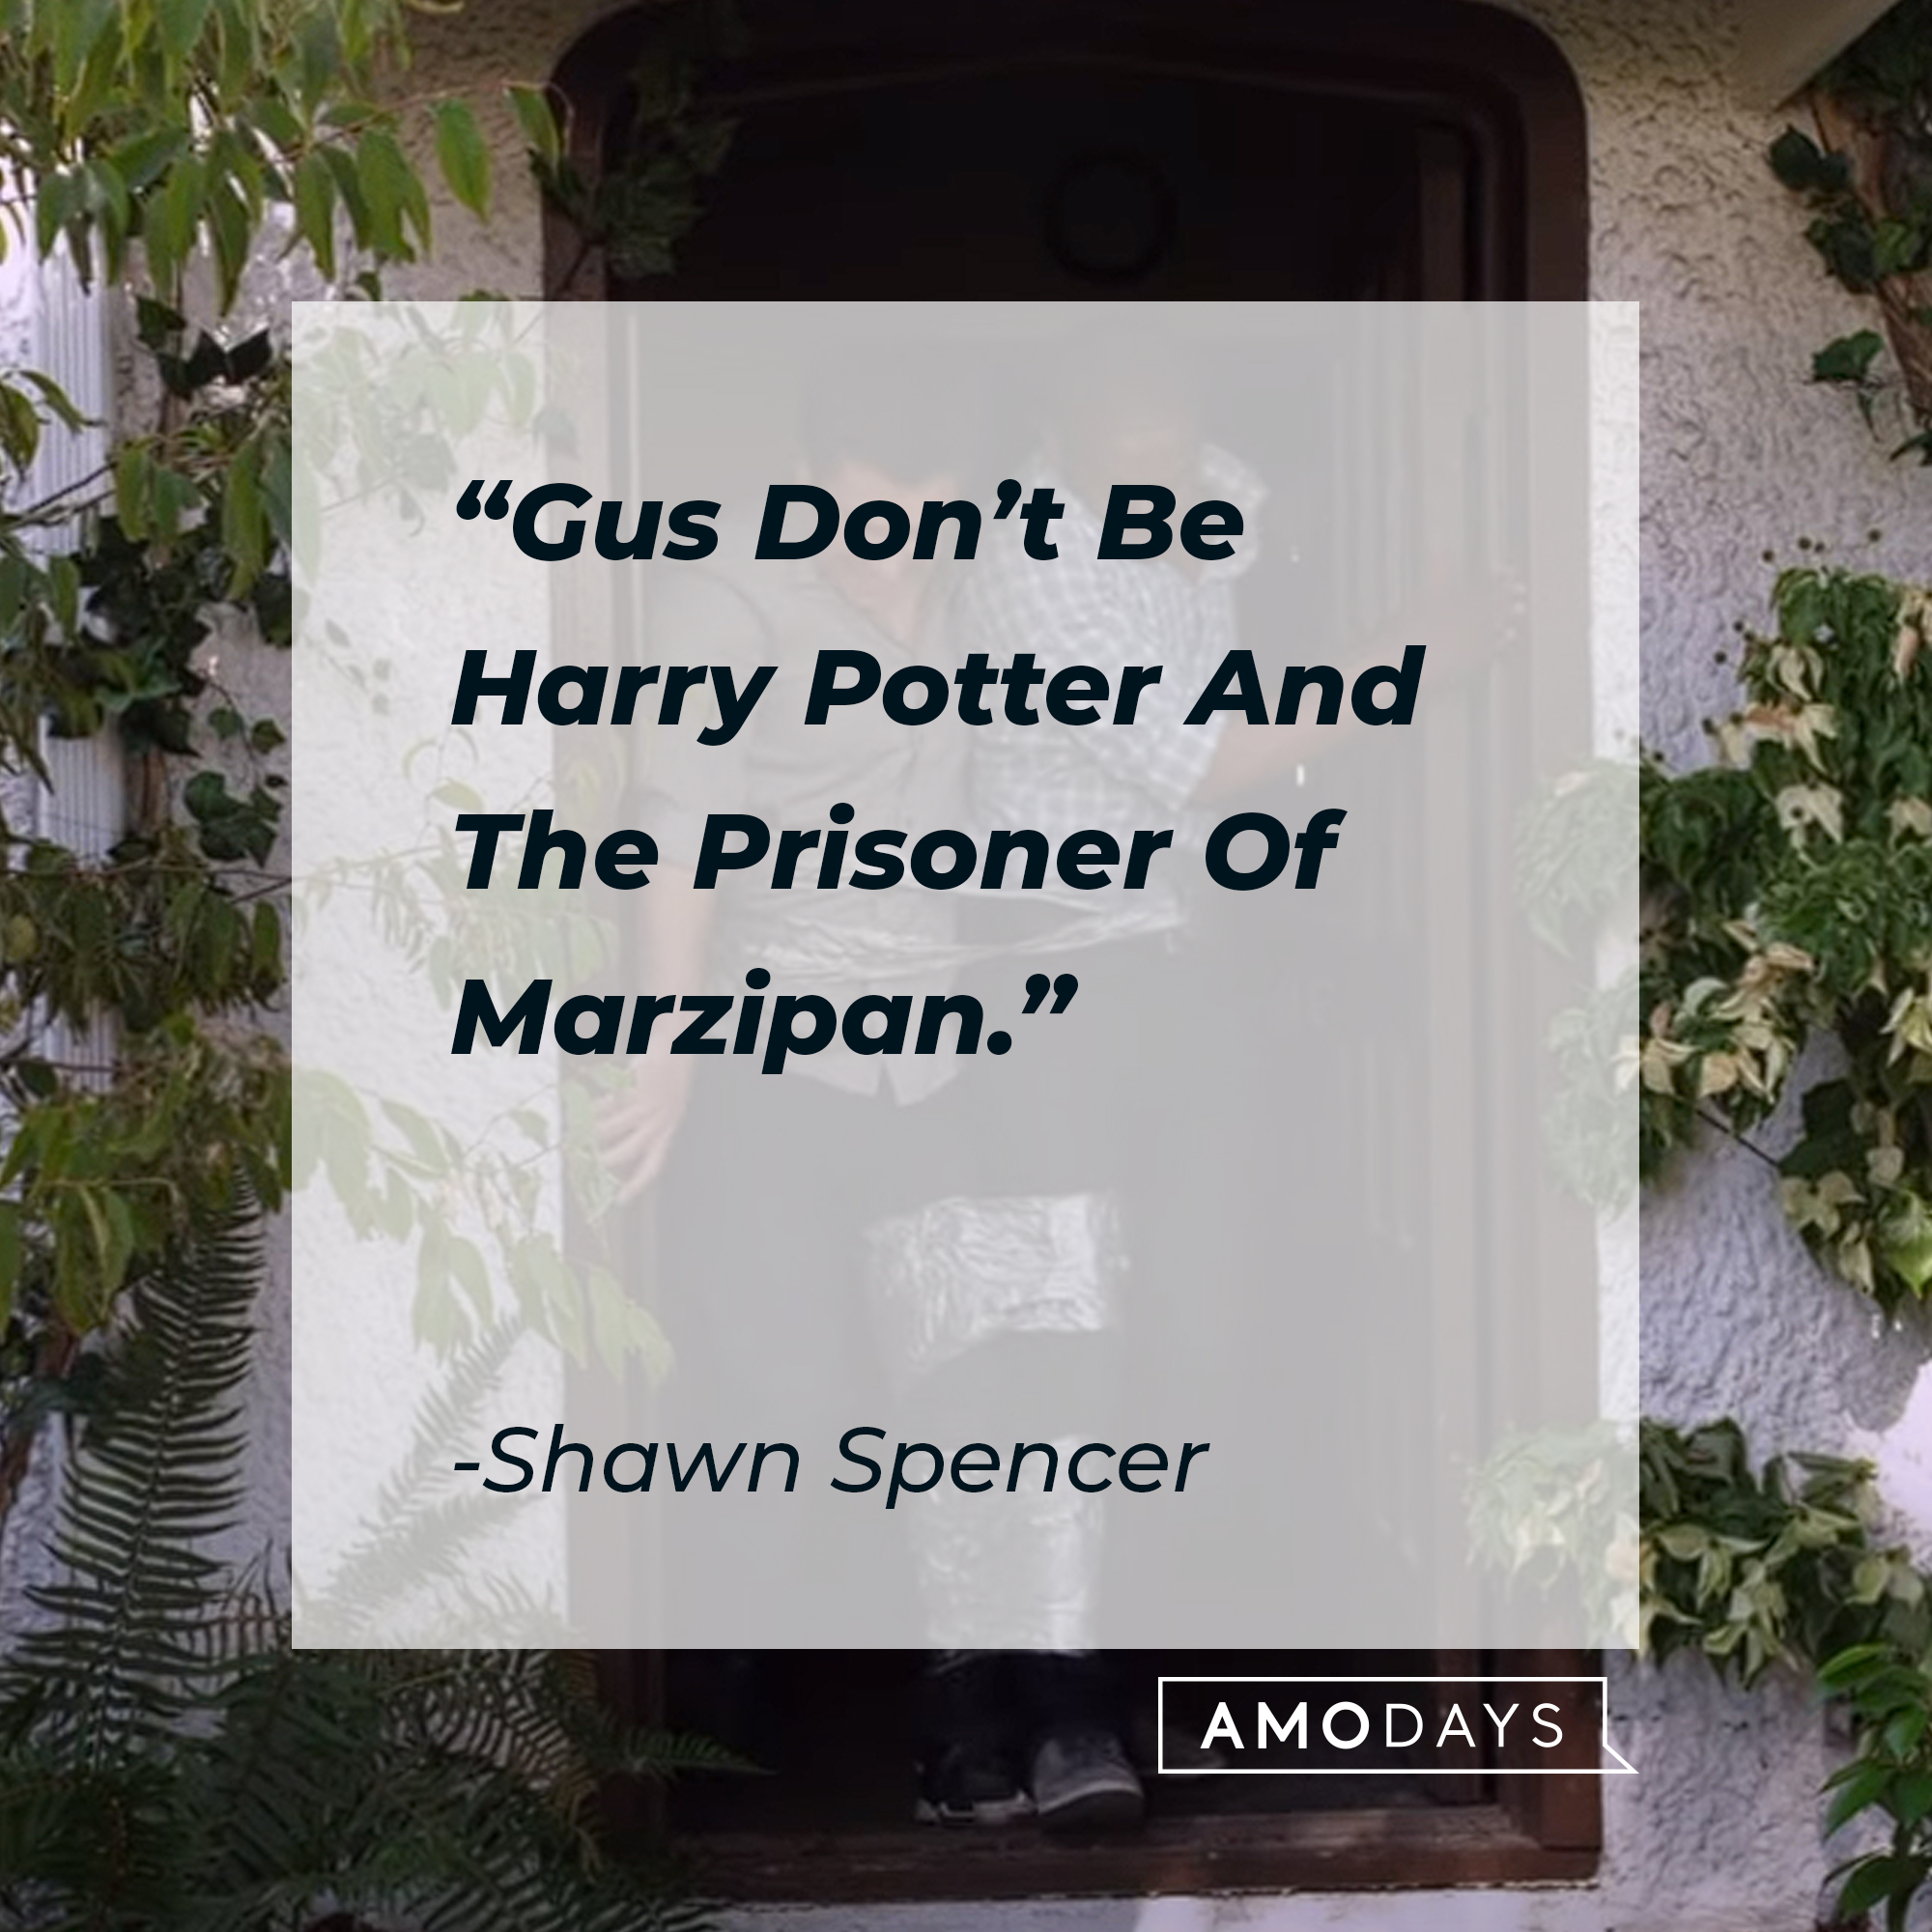 Shawn Spencer's quote: "Gus Don't Be Harry Potter And The Prisoner of Marzipan." | Source: youtube.com/Psych